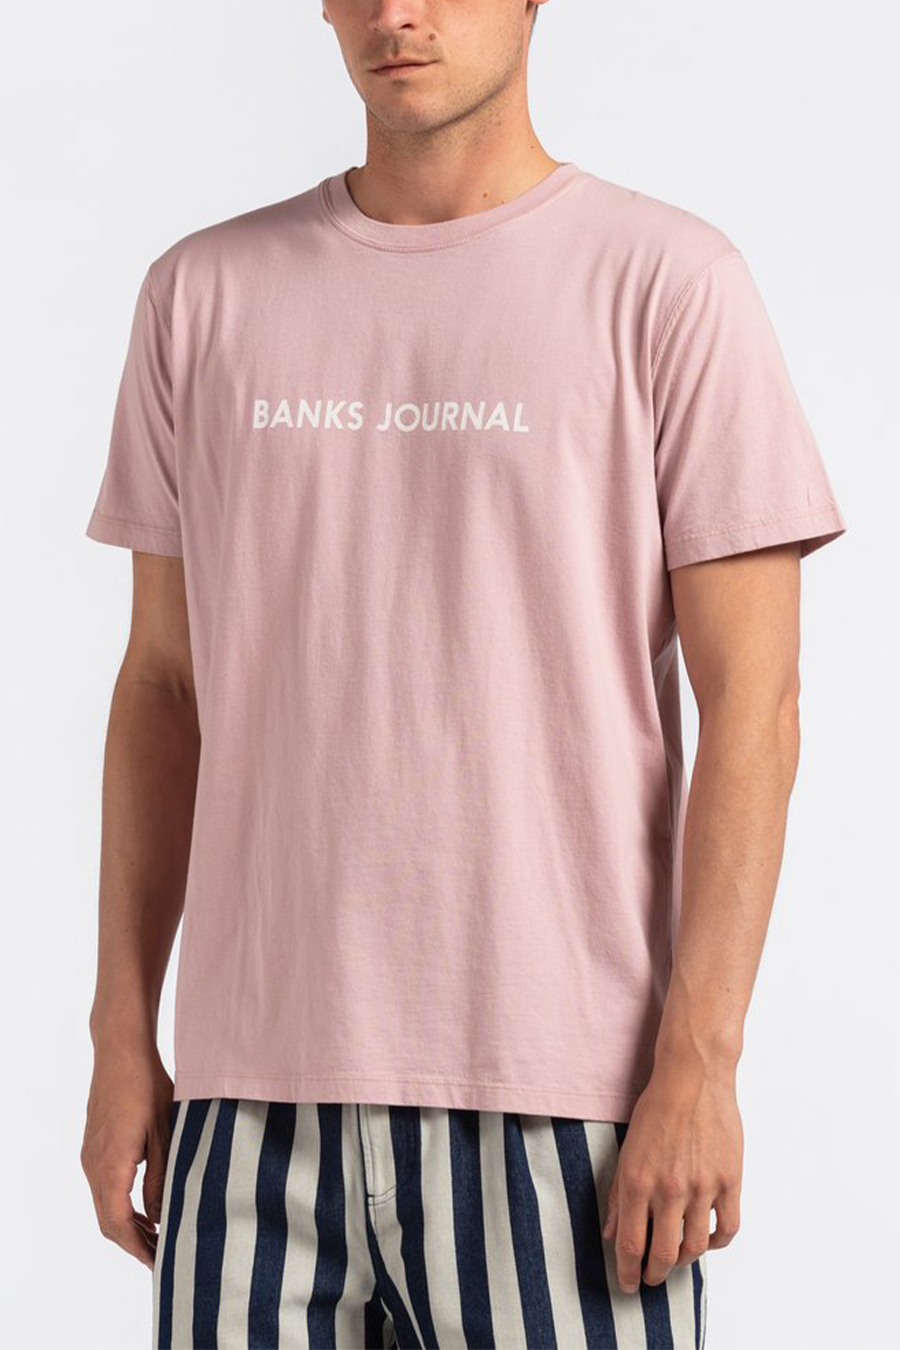 Label Classic Tee | Pale Lavender - Main Image Number 1 of 2